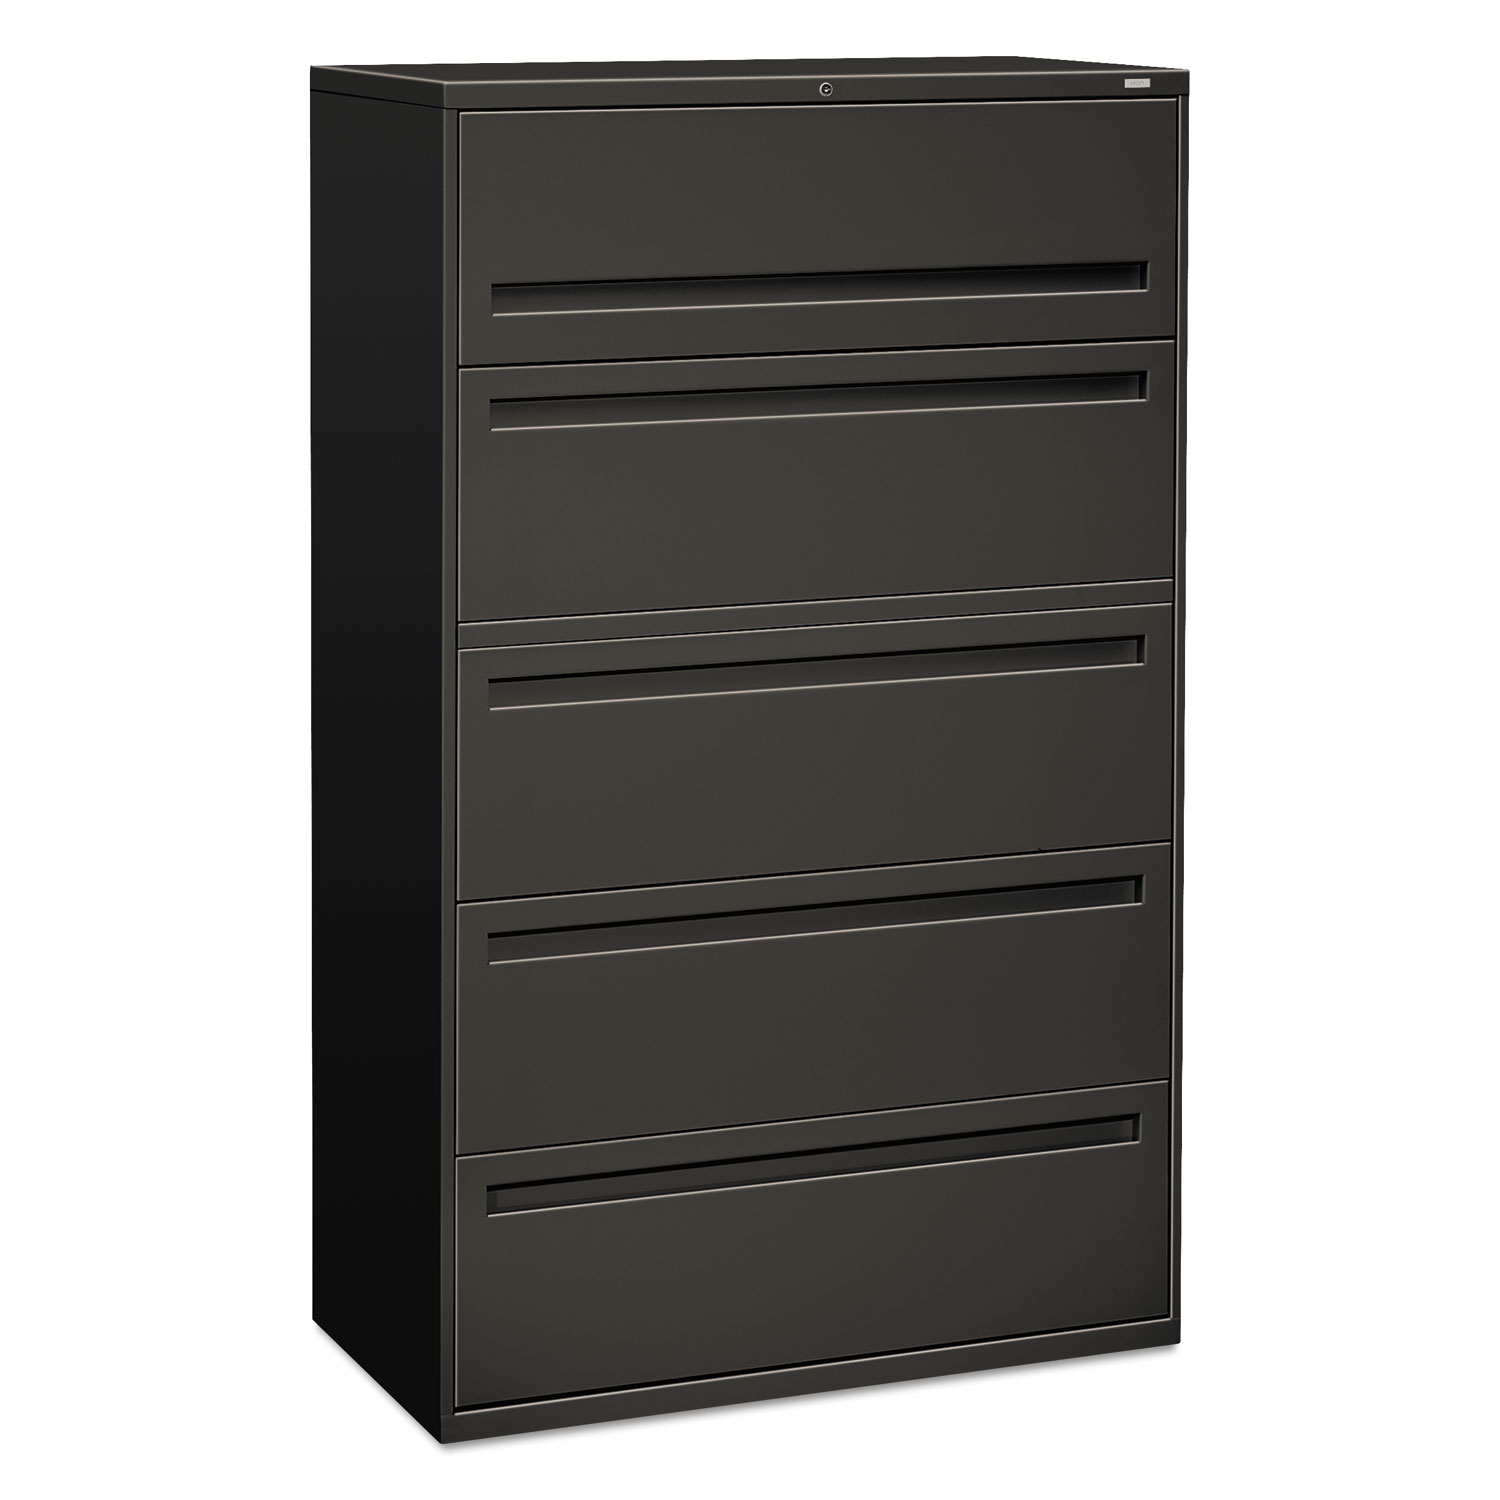 700 Series Five-Drawer Lateral File w/Roll-Out Shelves, 42w x 18d x 64 1/4h, Charcoal